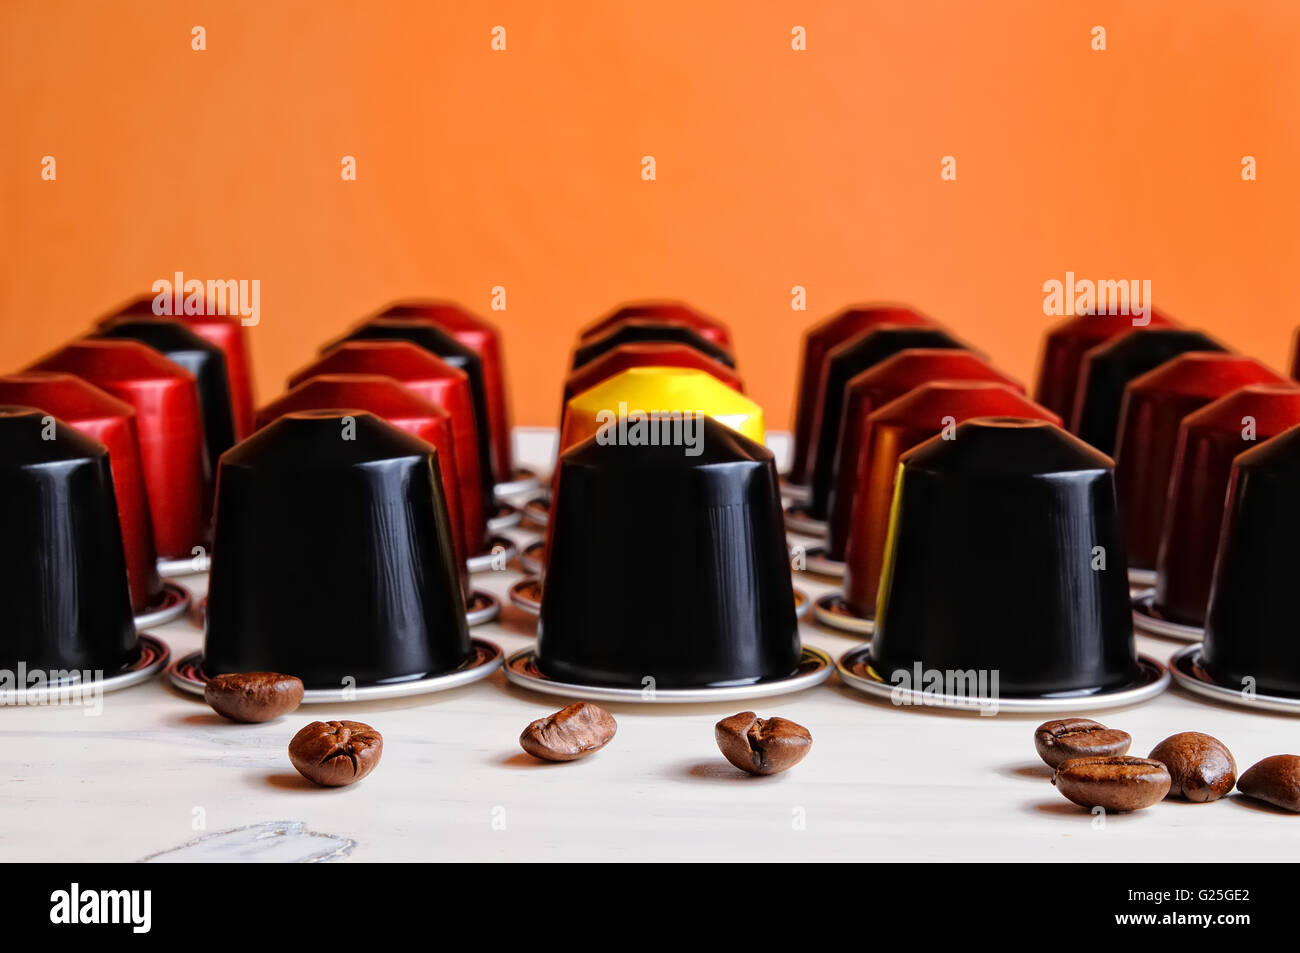 set of espresso coffee capsules for machine aligned on a table Stock Photo